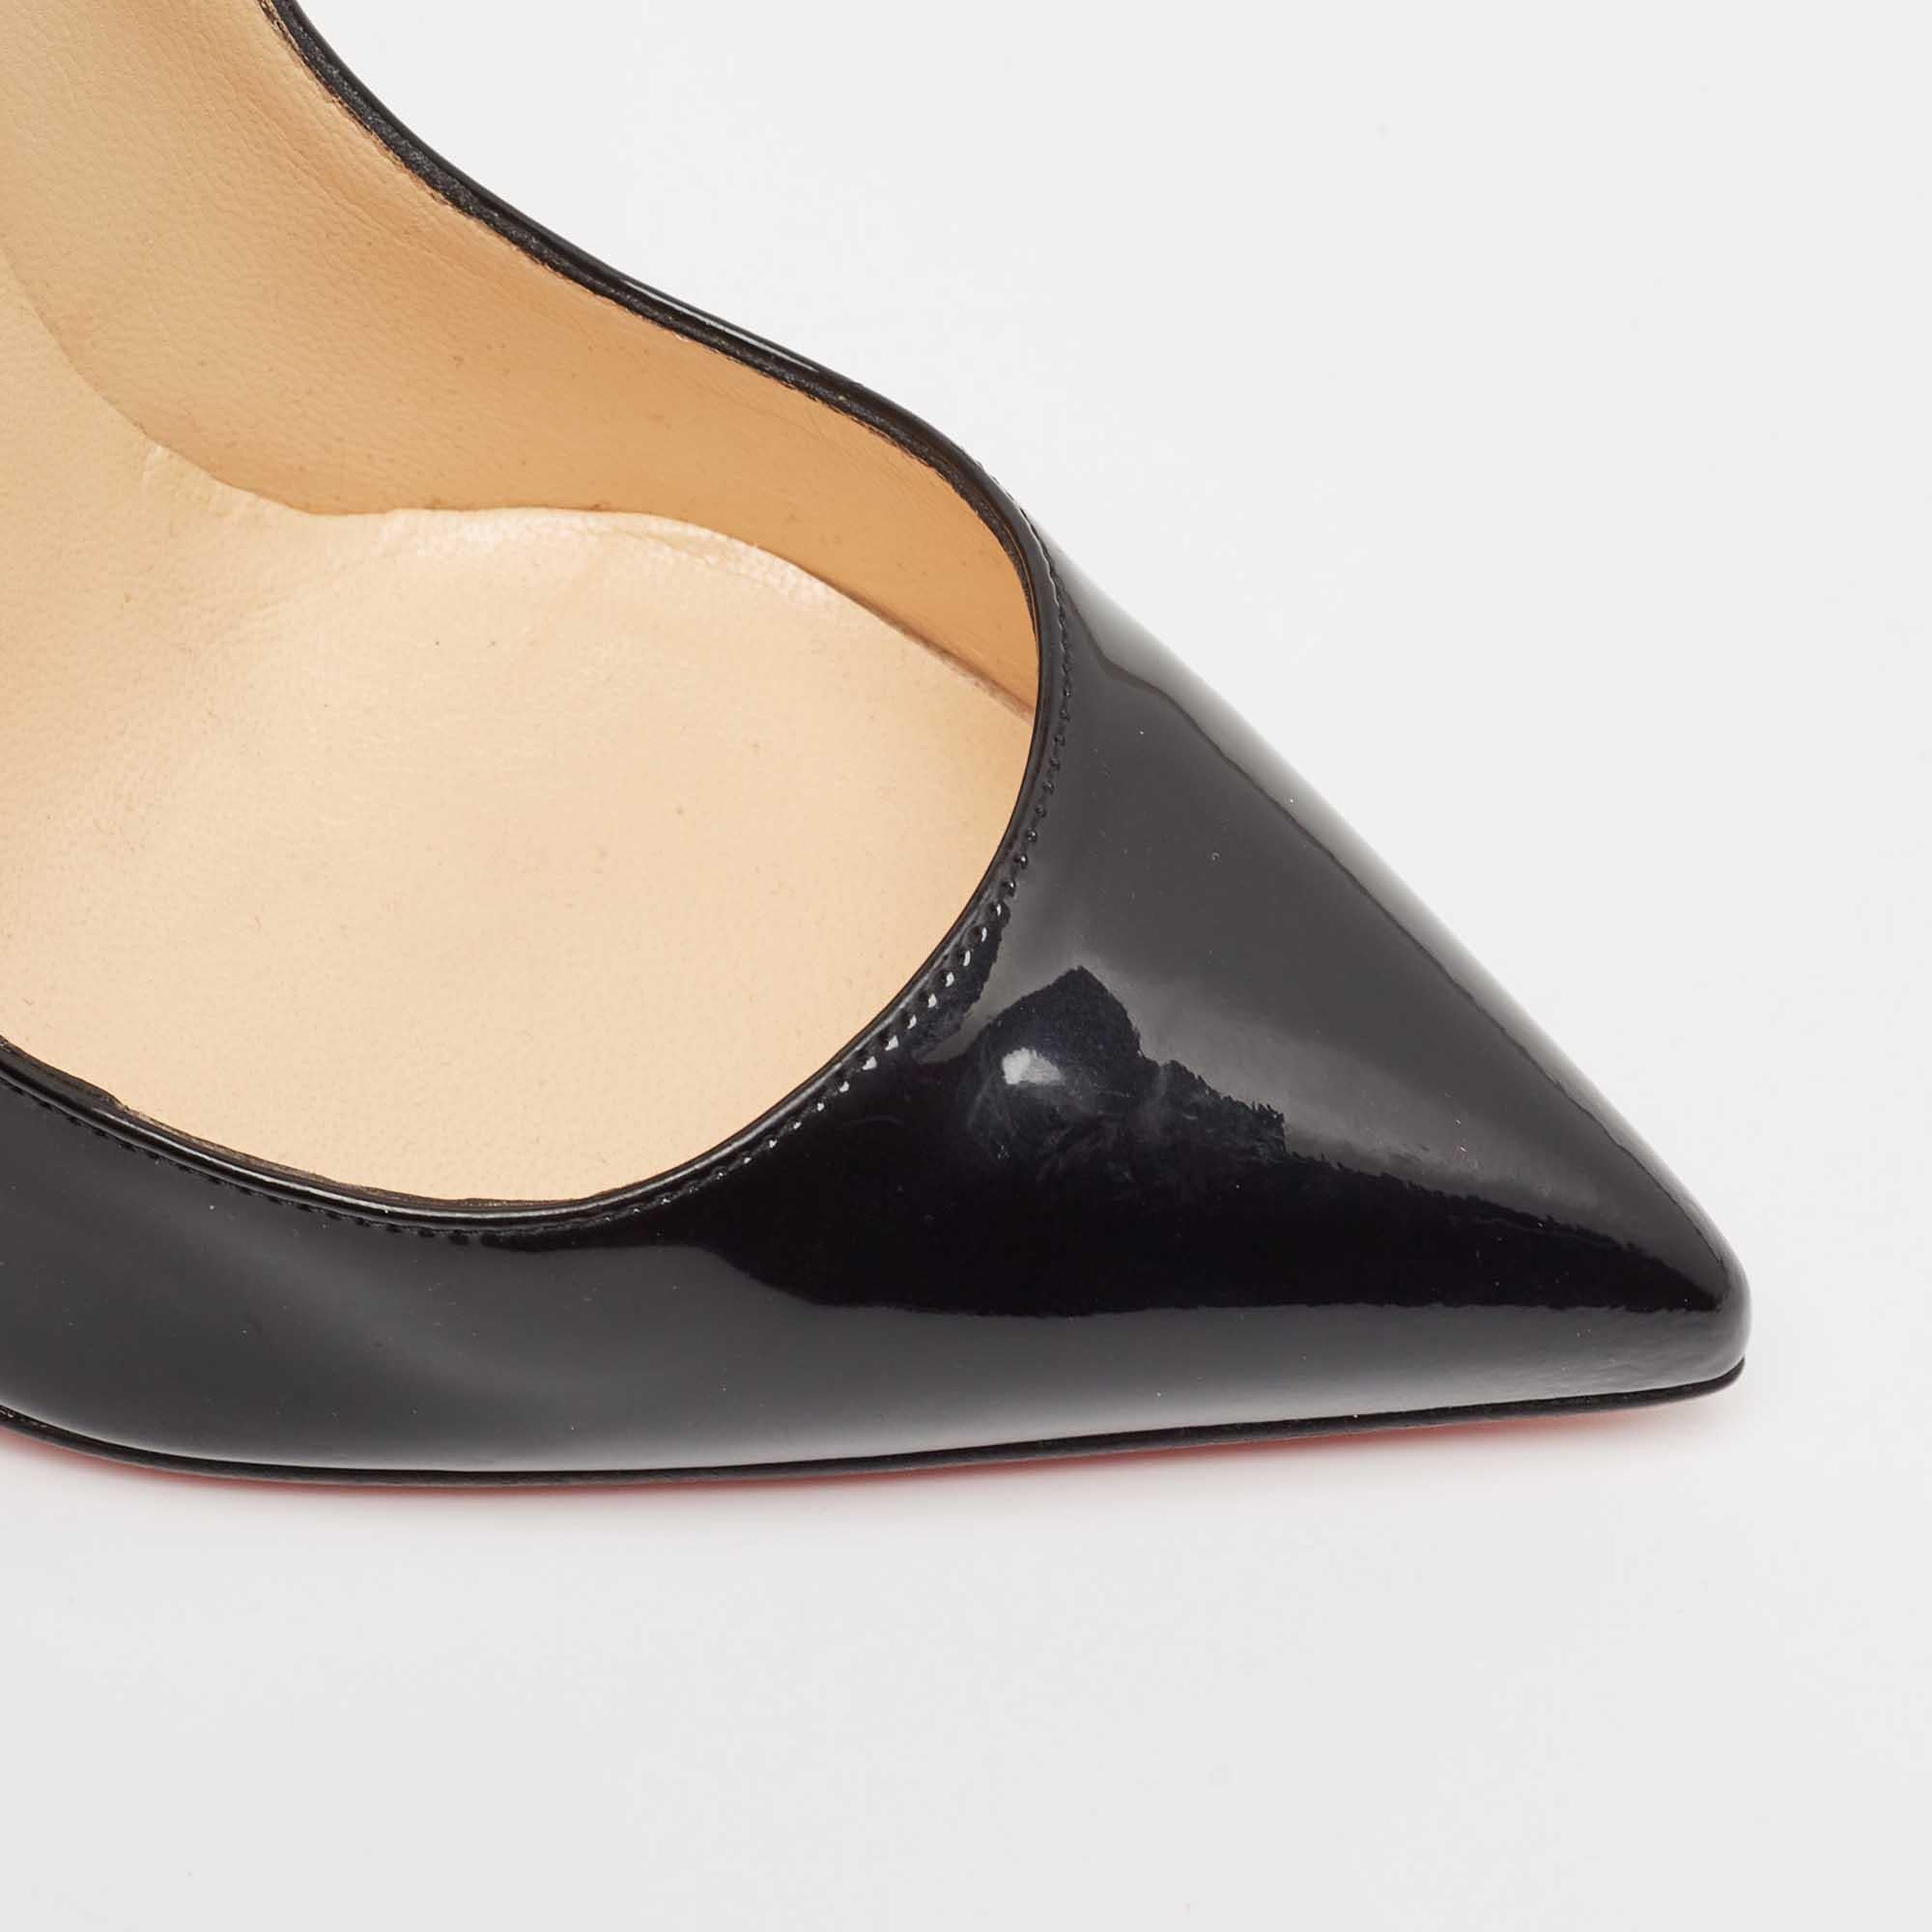 Christian Louboutin Black Patent Leather Pigalle Pumps Size 37 For Sale 5